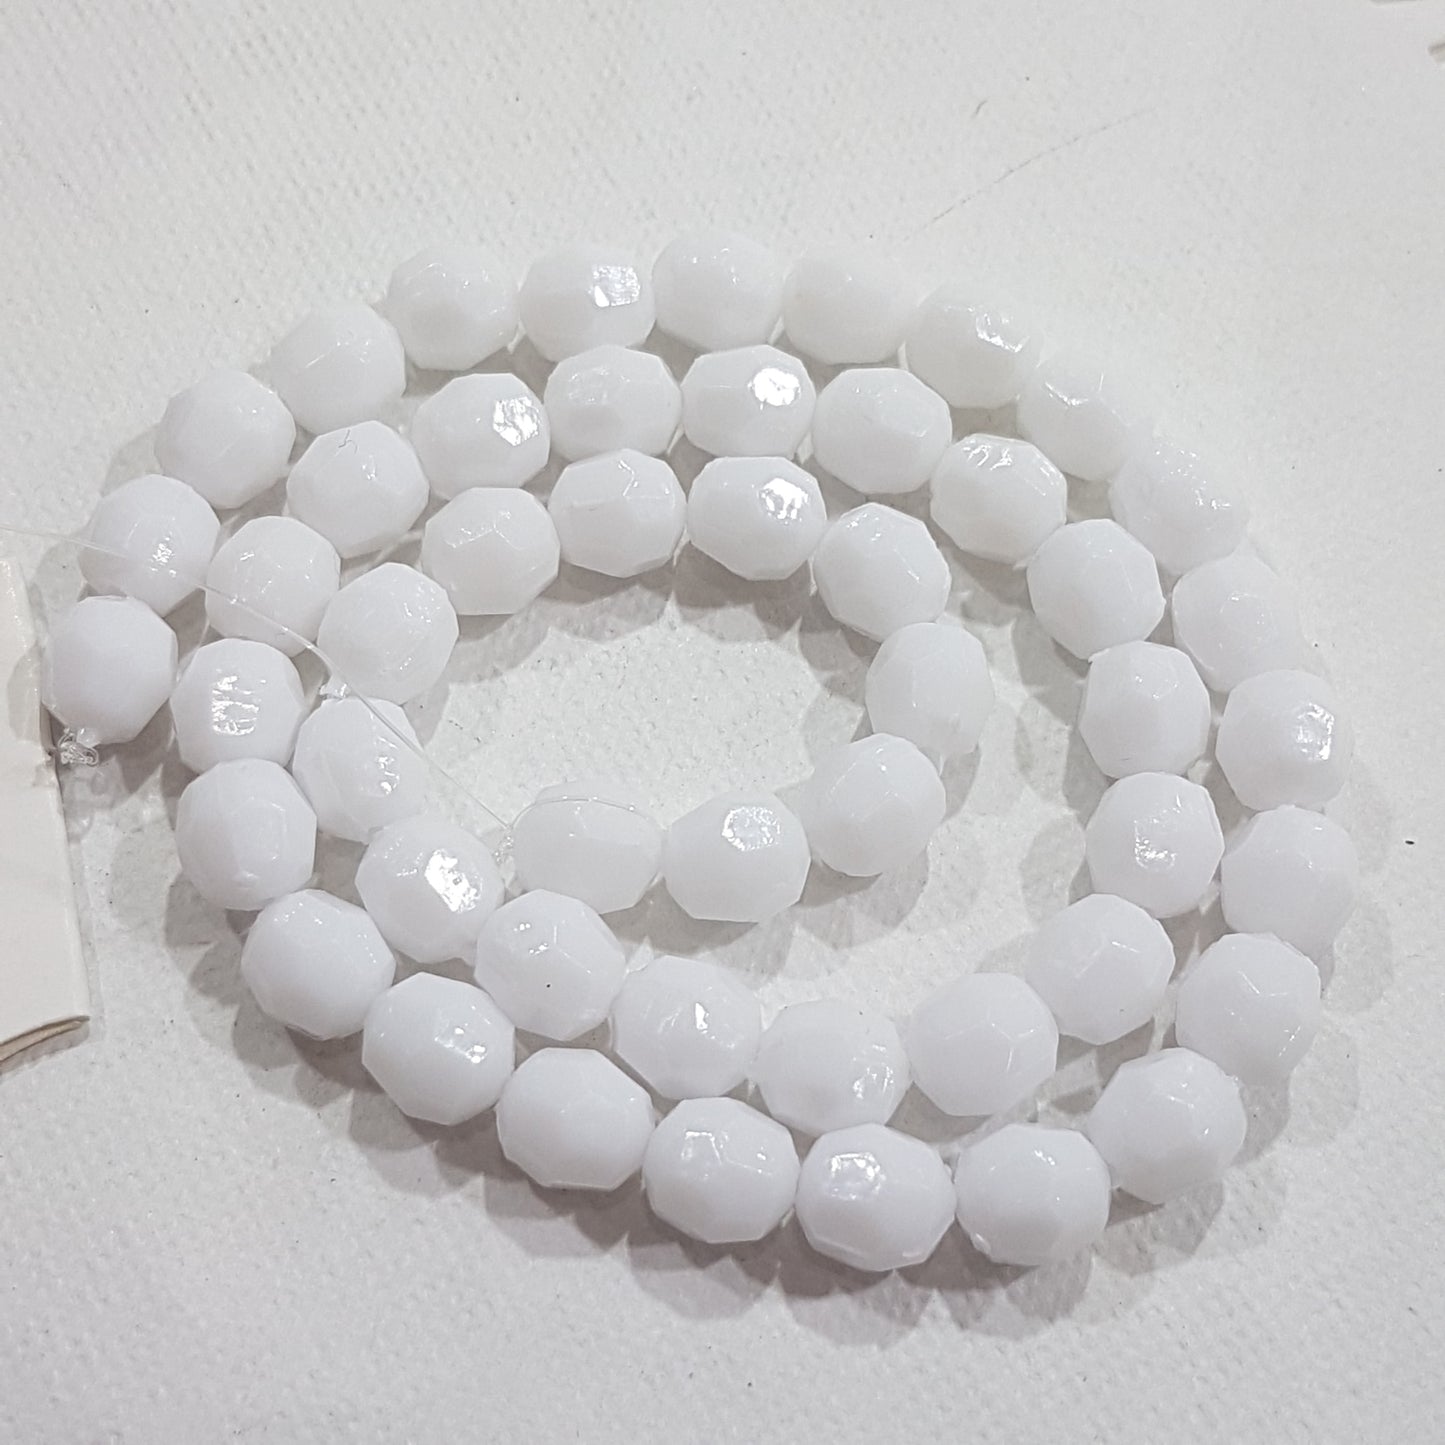 50pc White Faceted Acrylic Beads